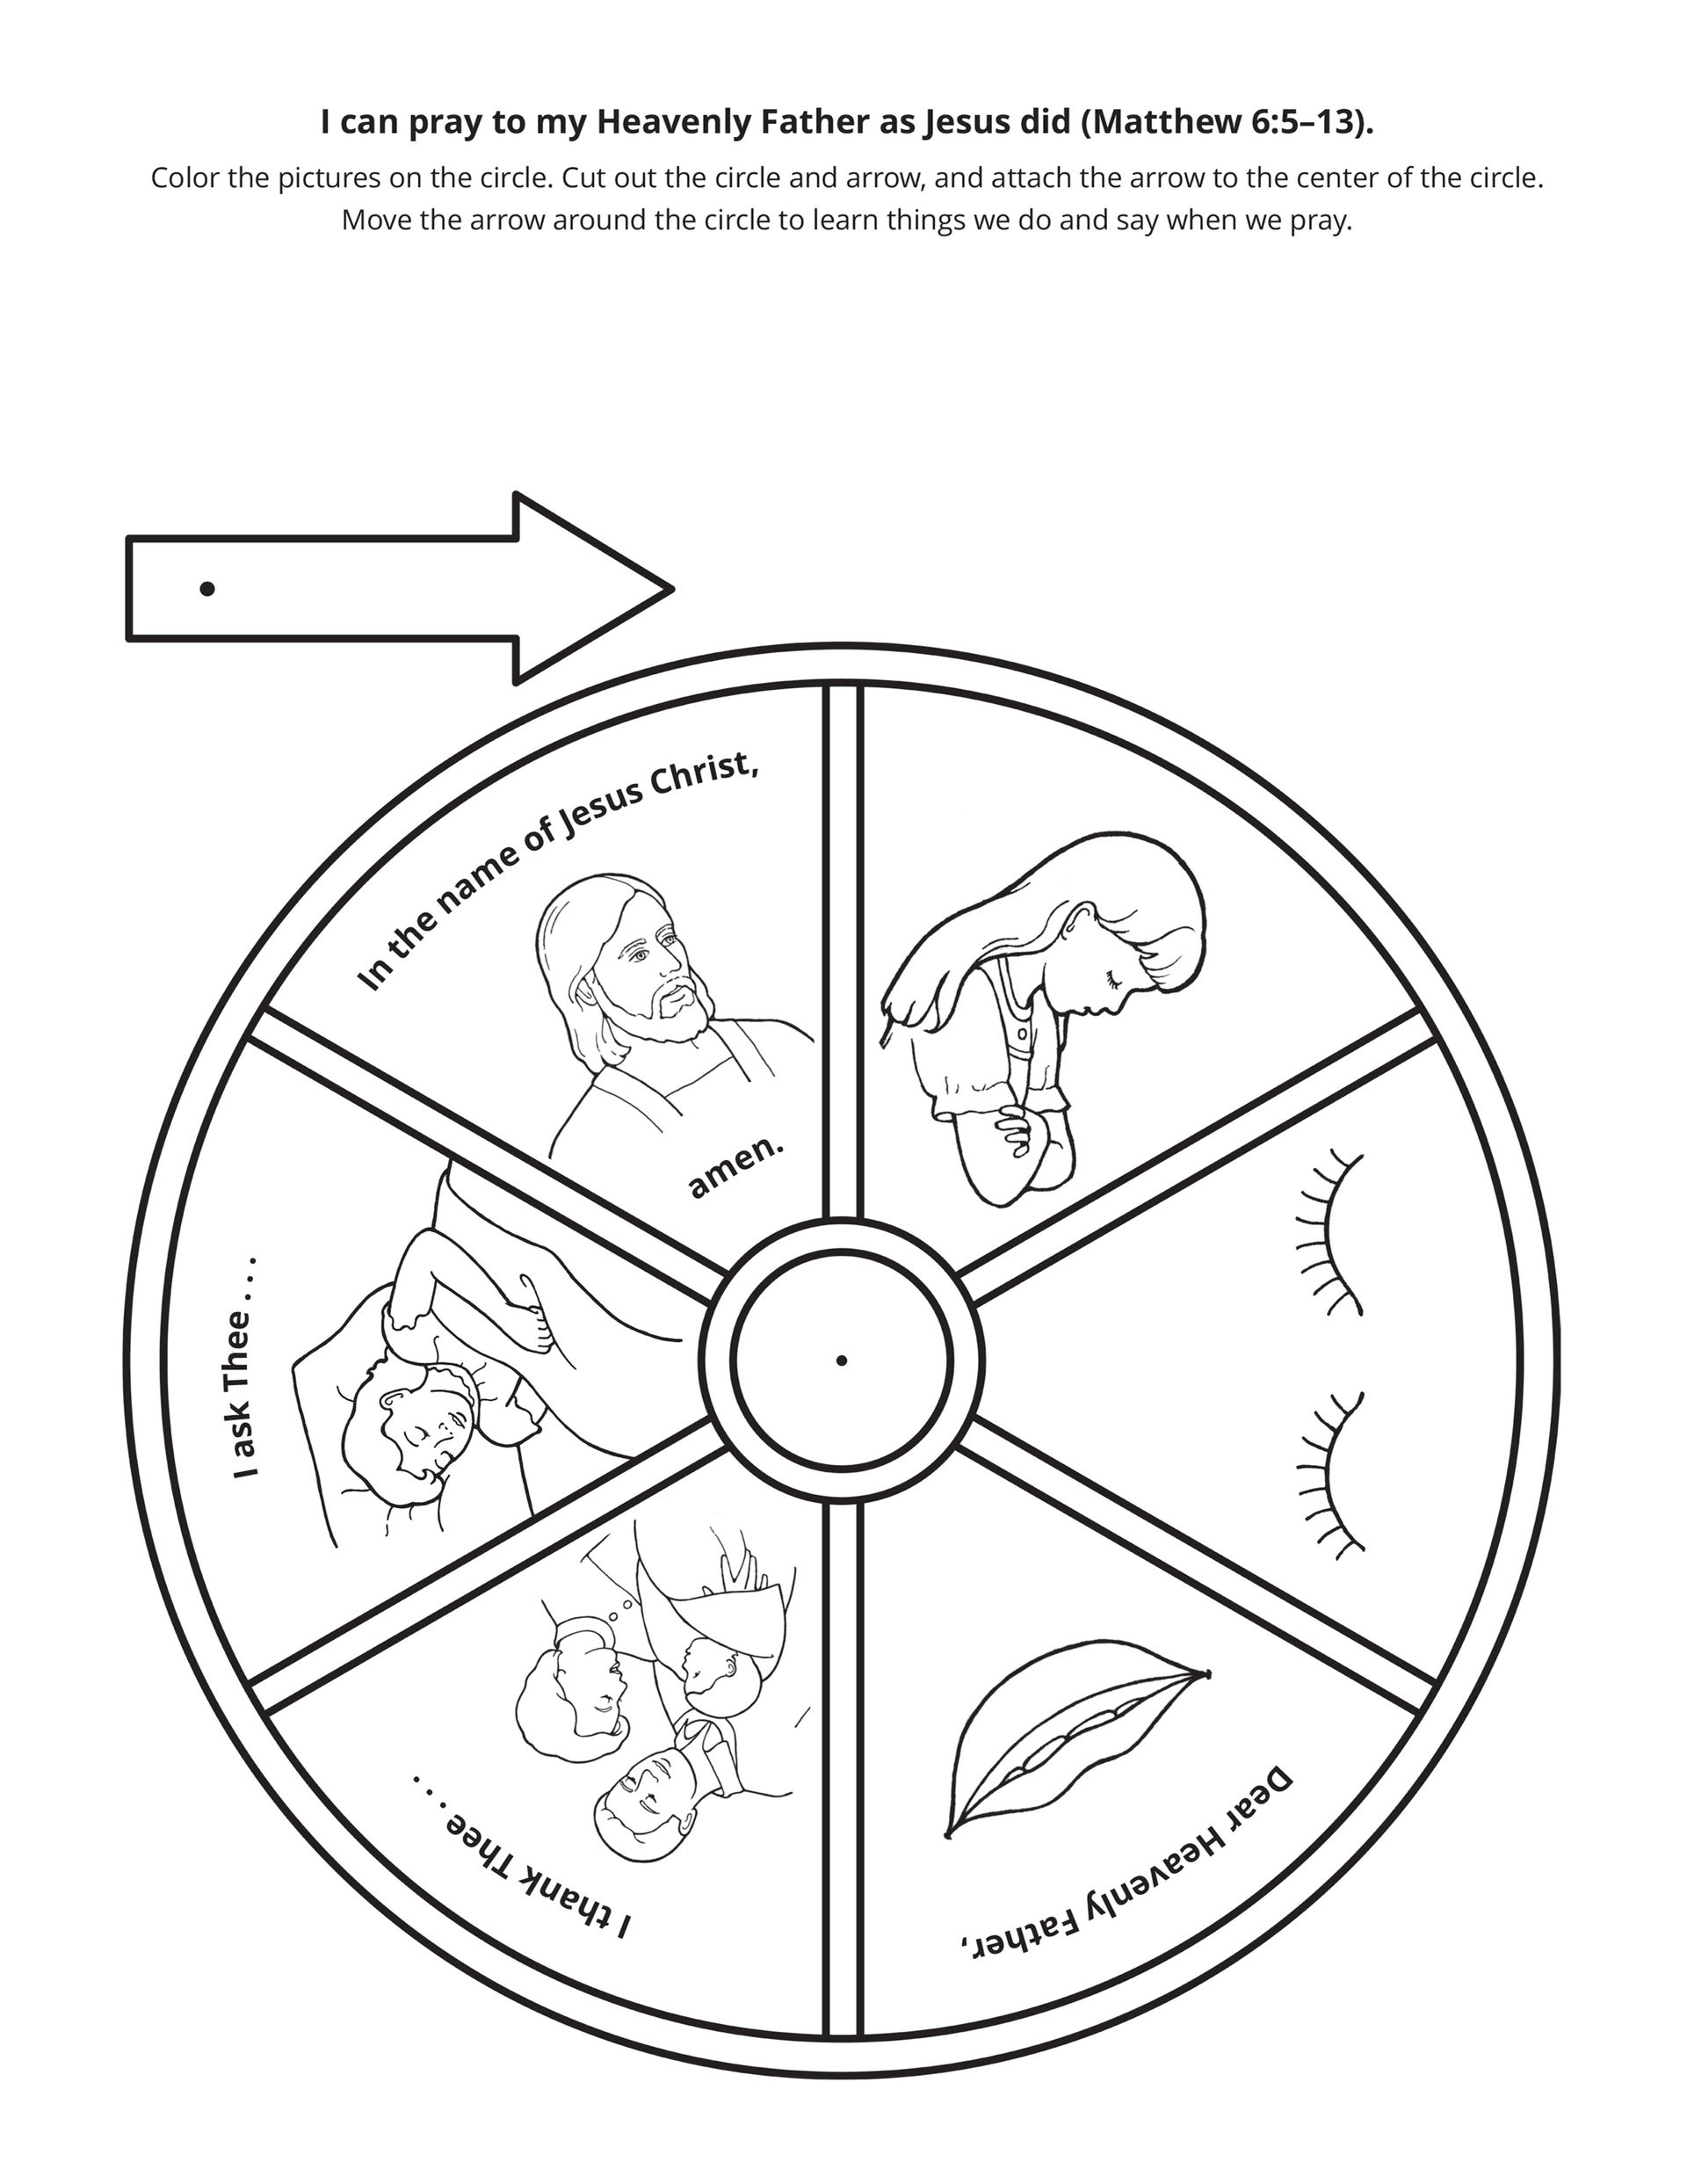 A wheel outlining a prayer and depicting things a child is grateful for.